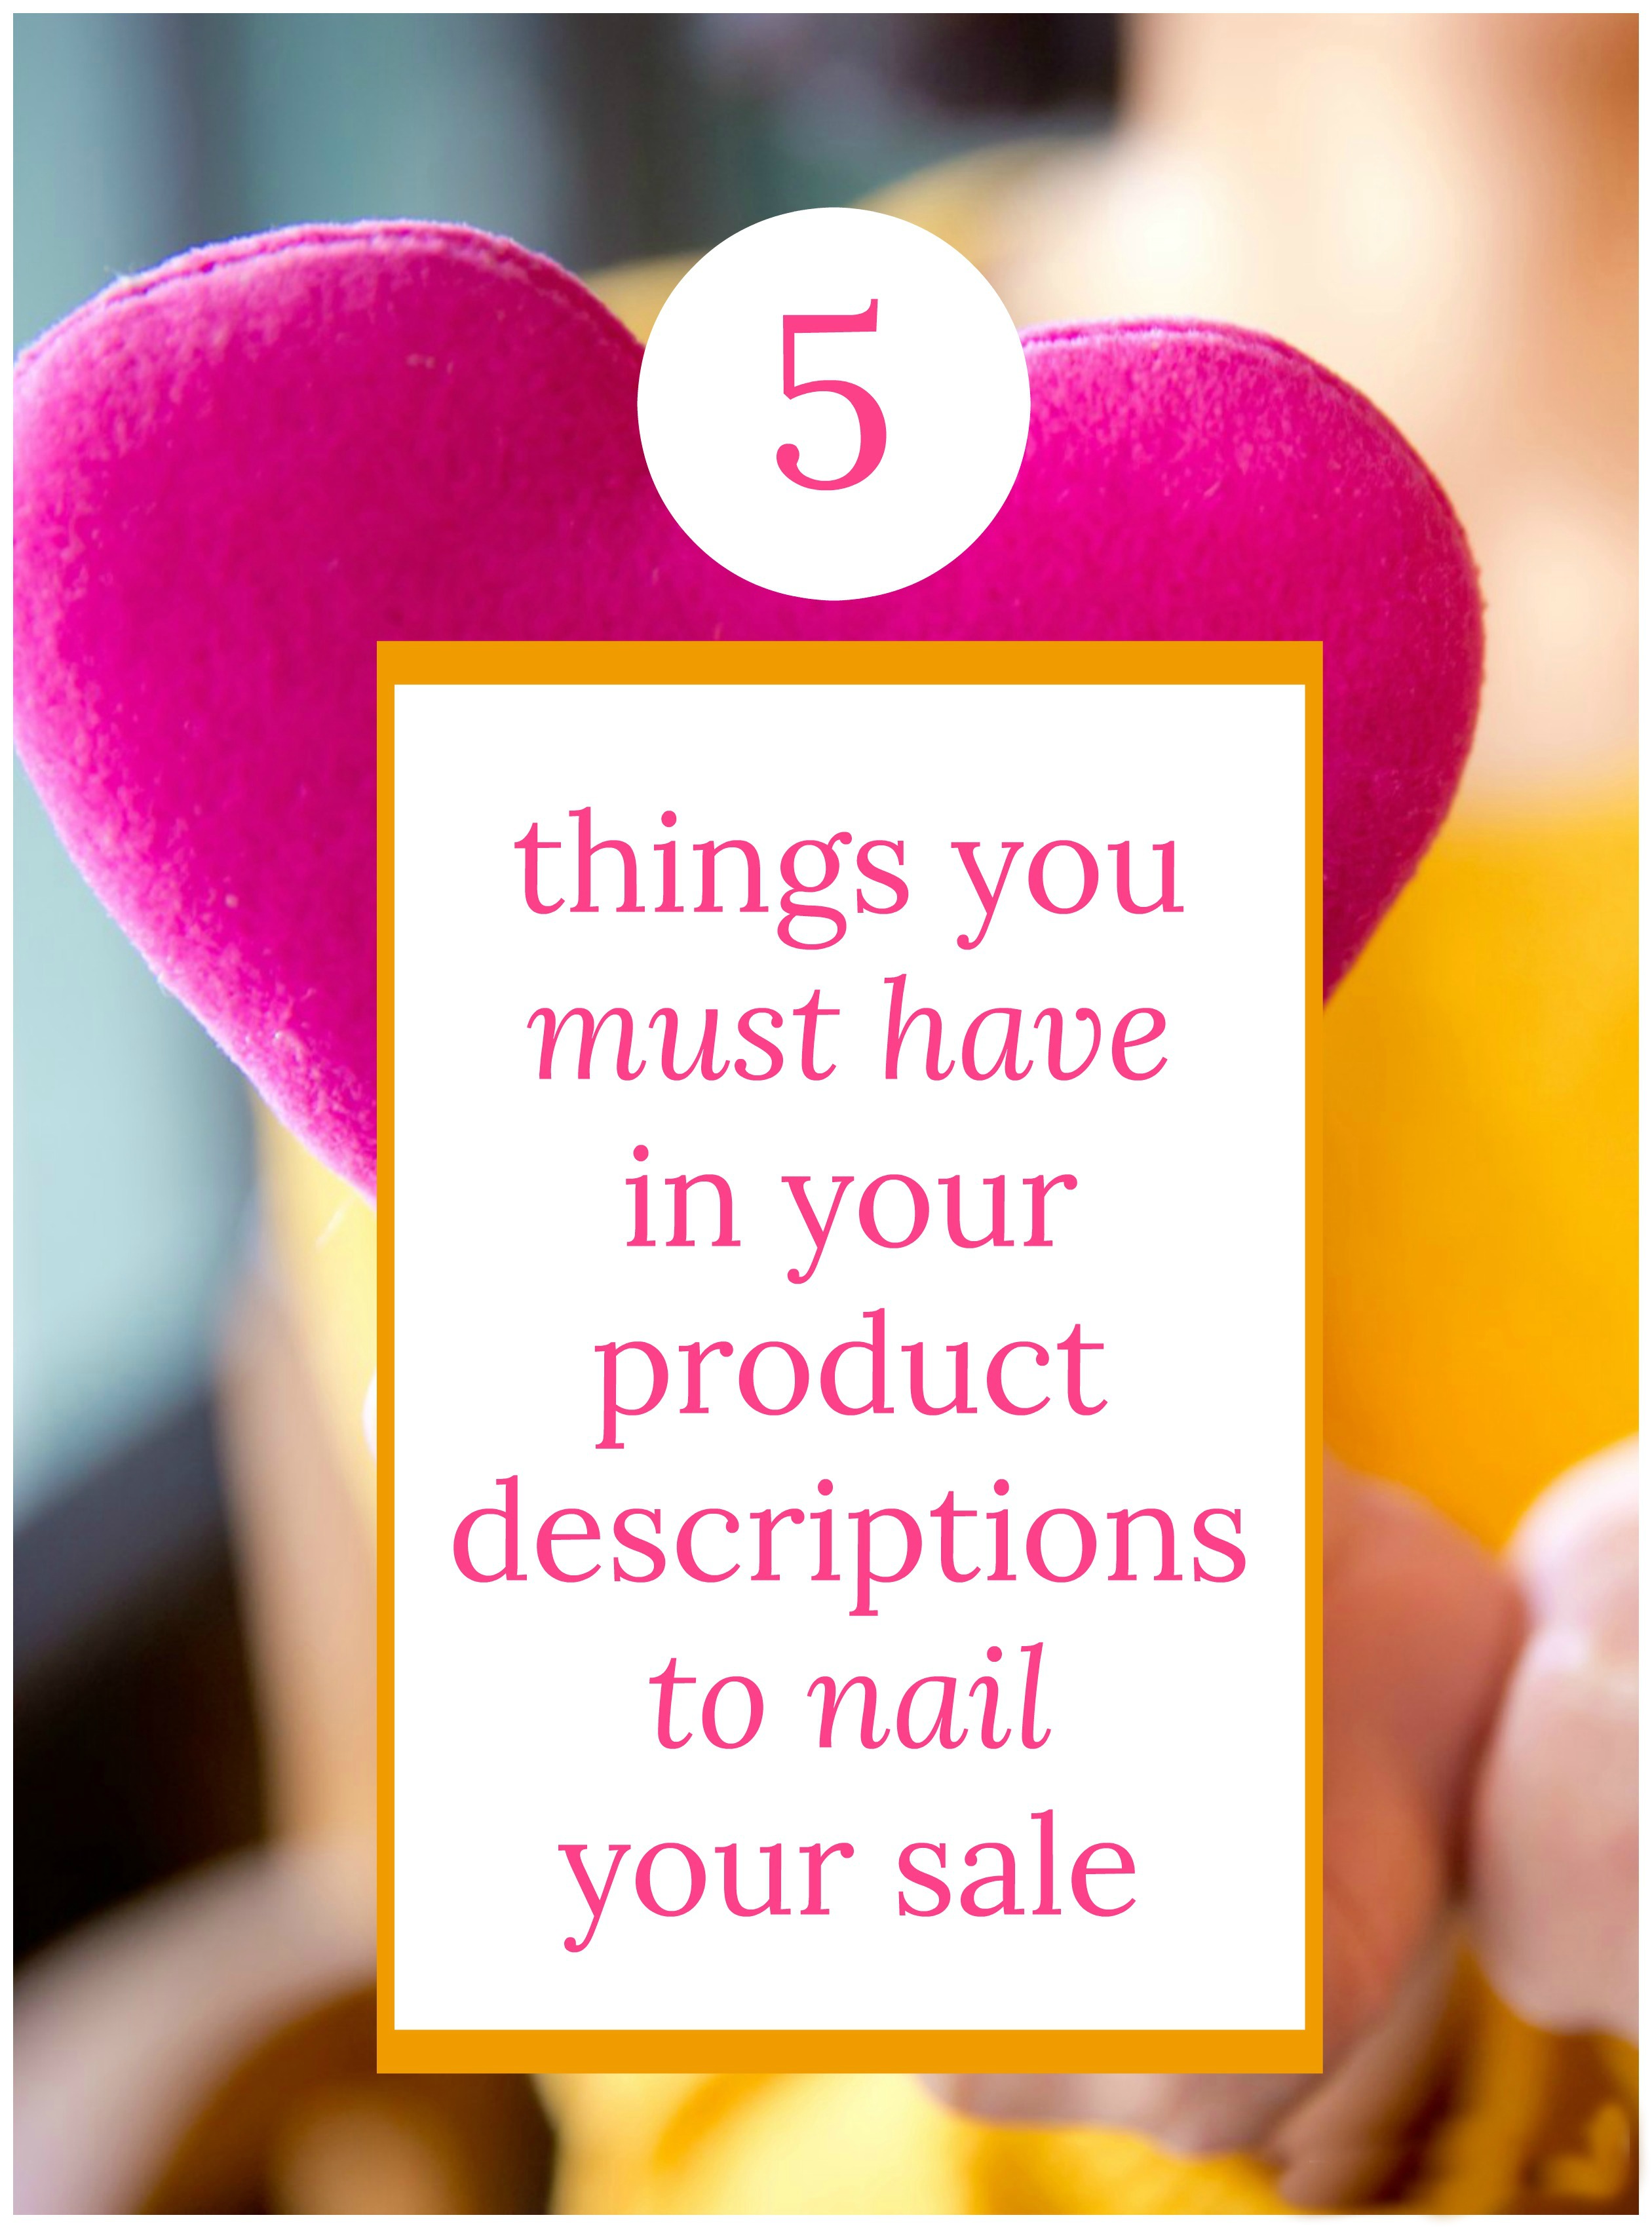 Ecommerce Product Descriptions: 5 Tips that Sell Your Product